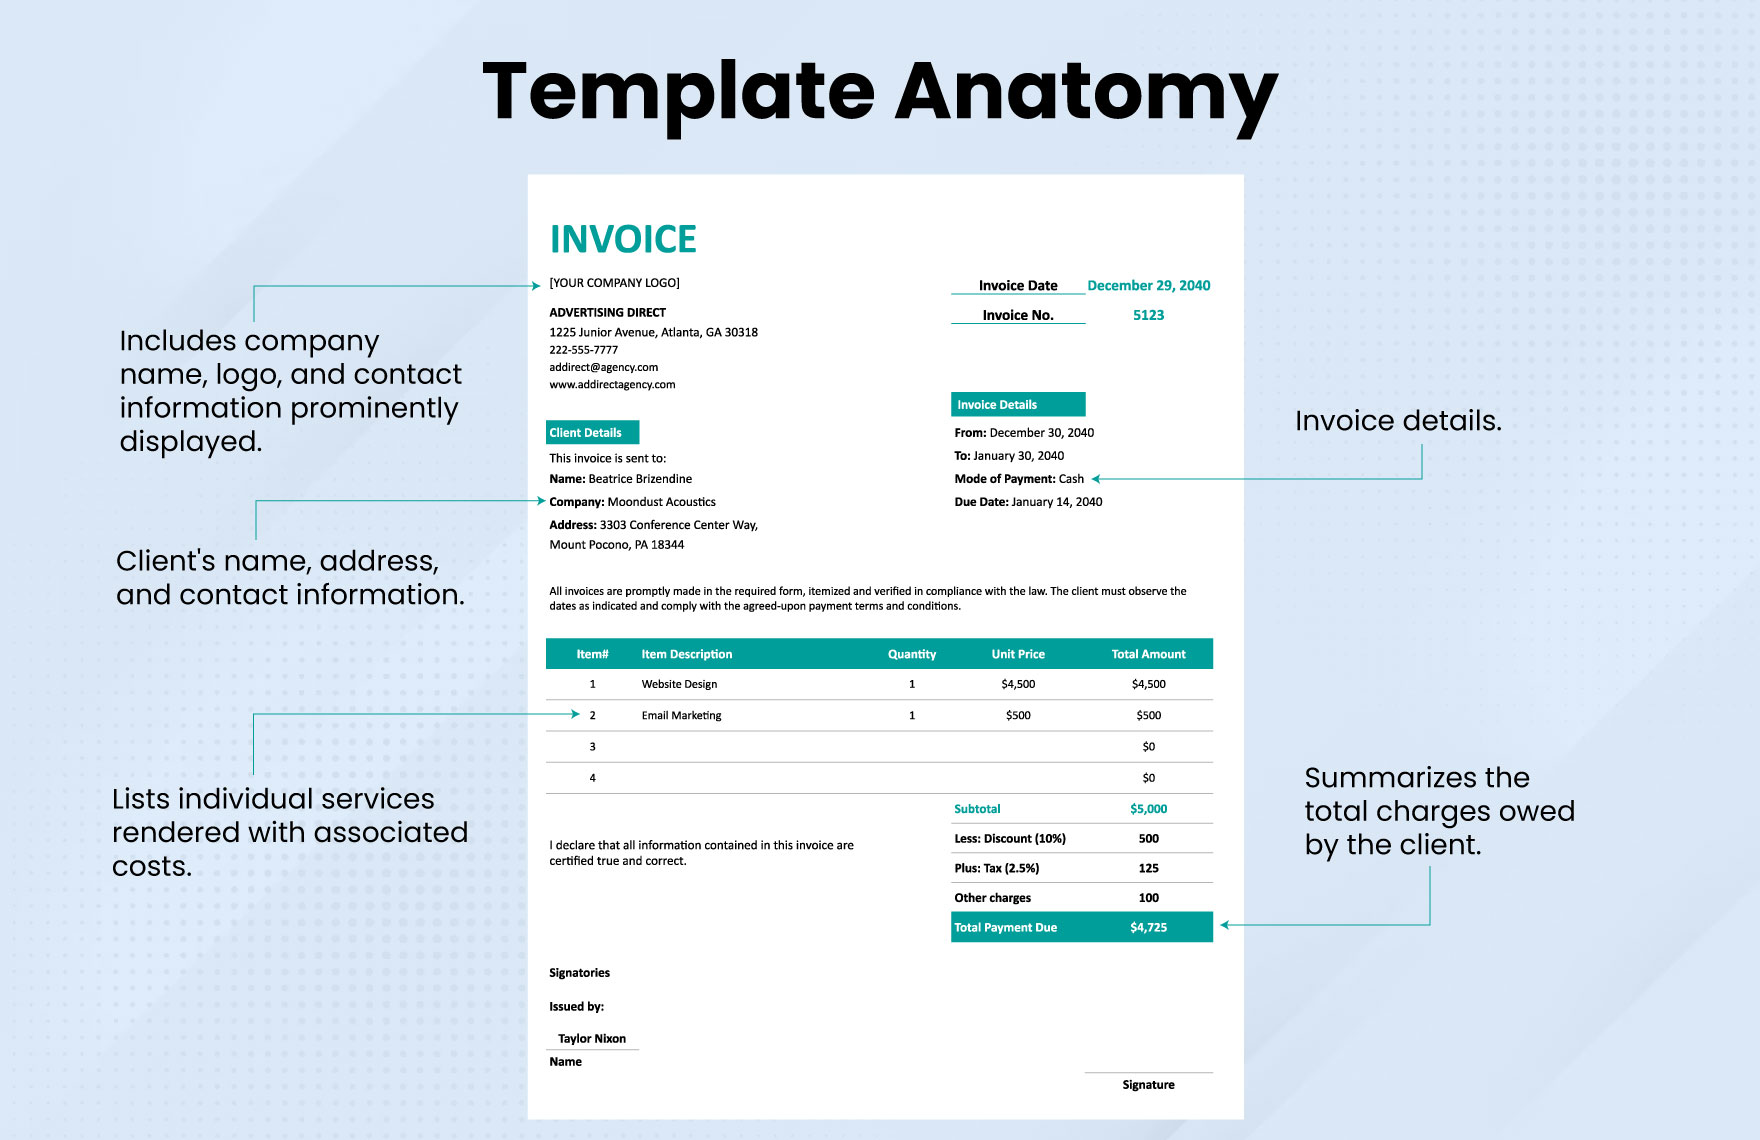 Professional Agency Invoice Template